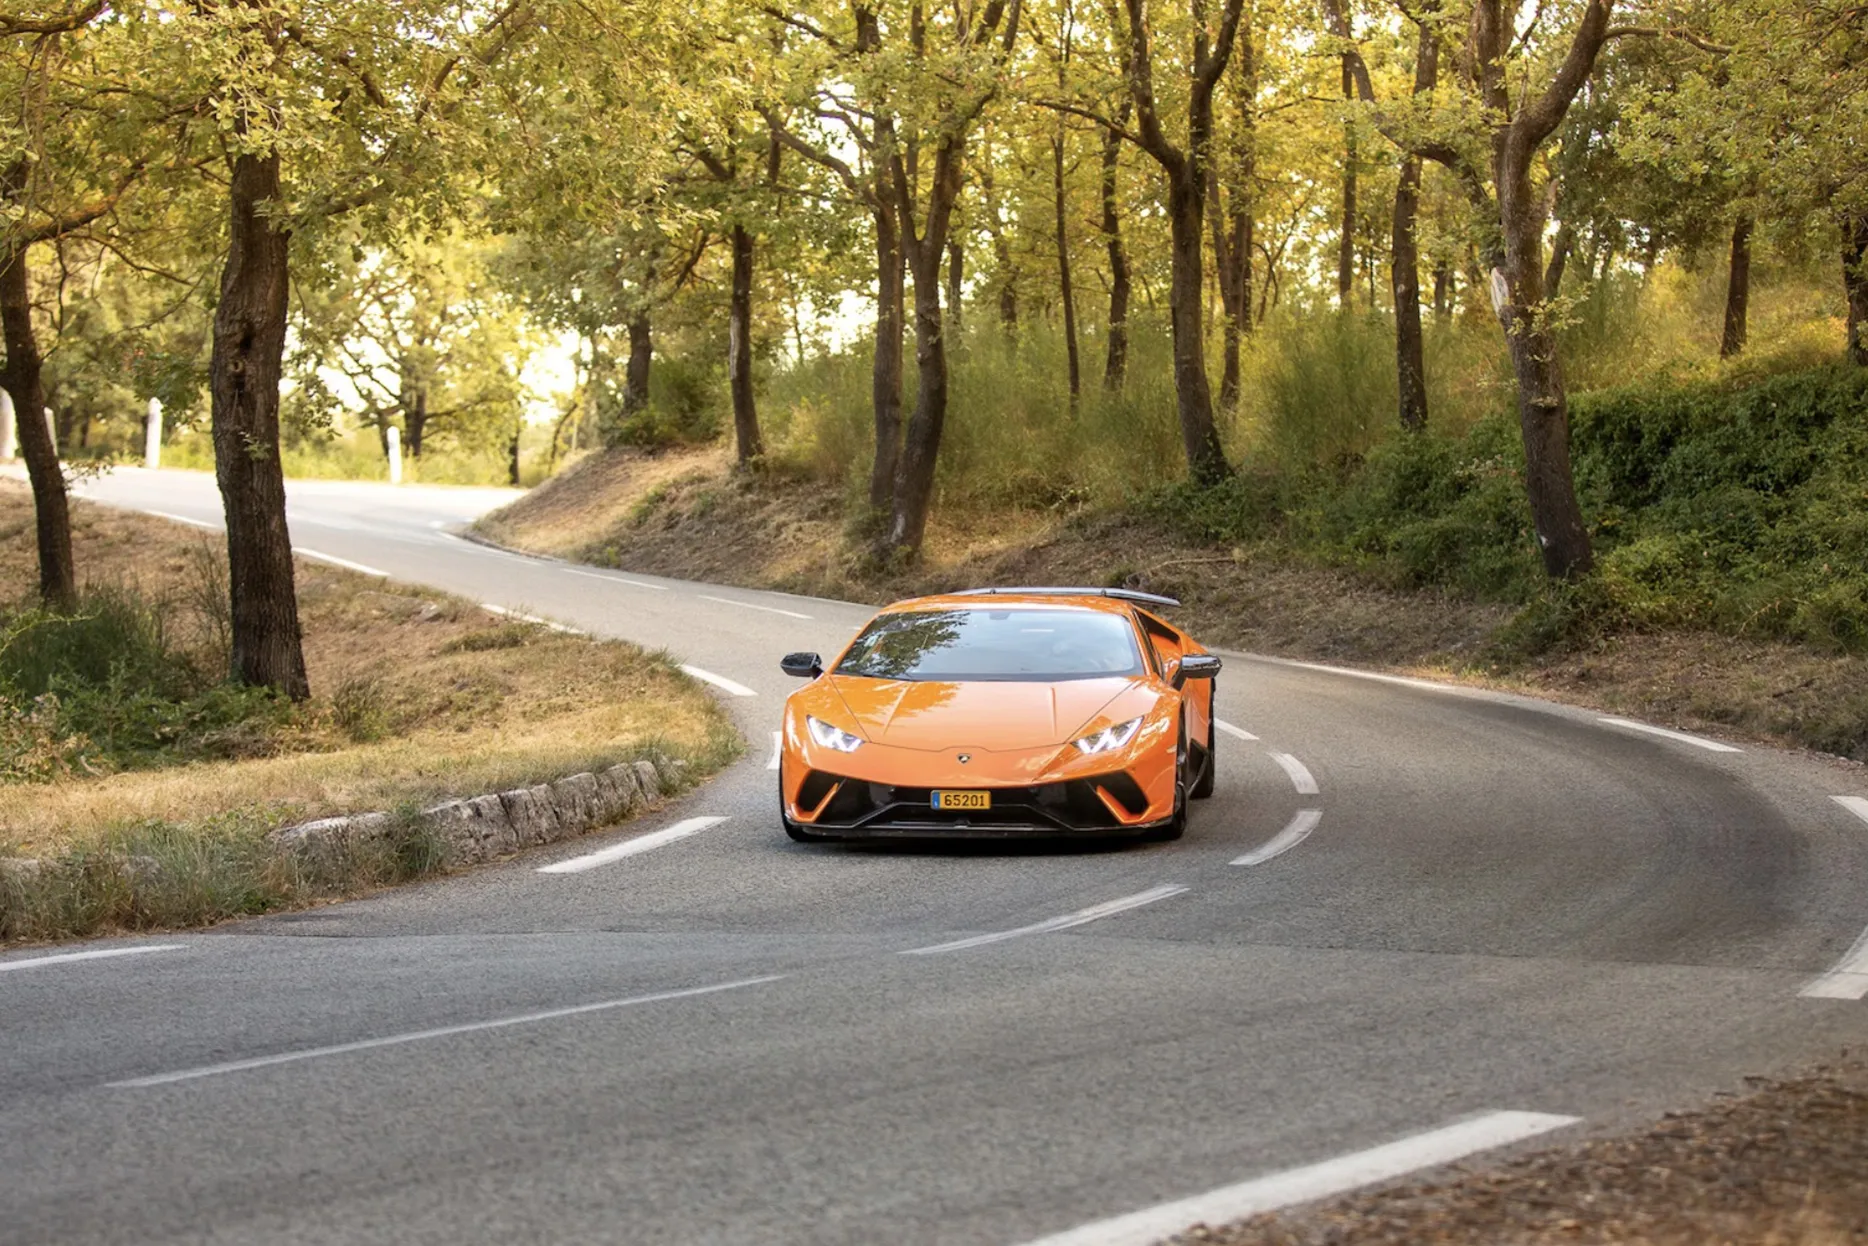 An orange Lamborghini makes its way through a forest in France